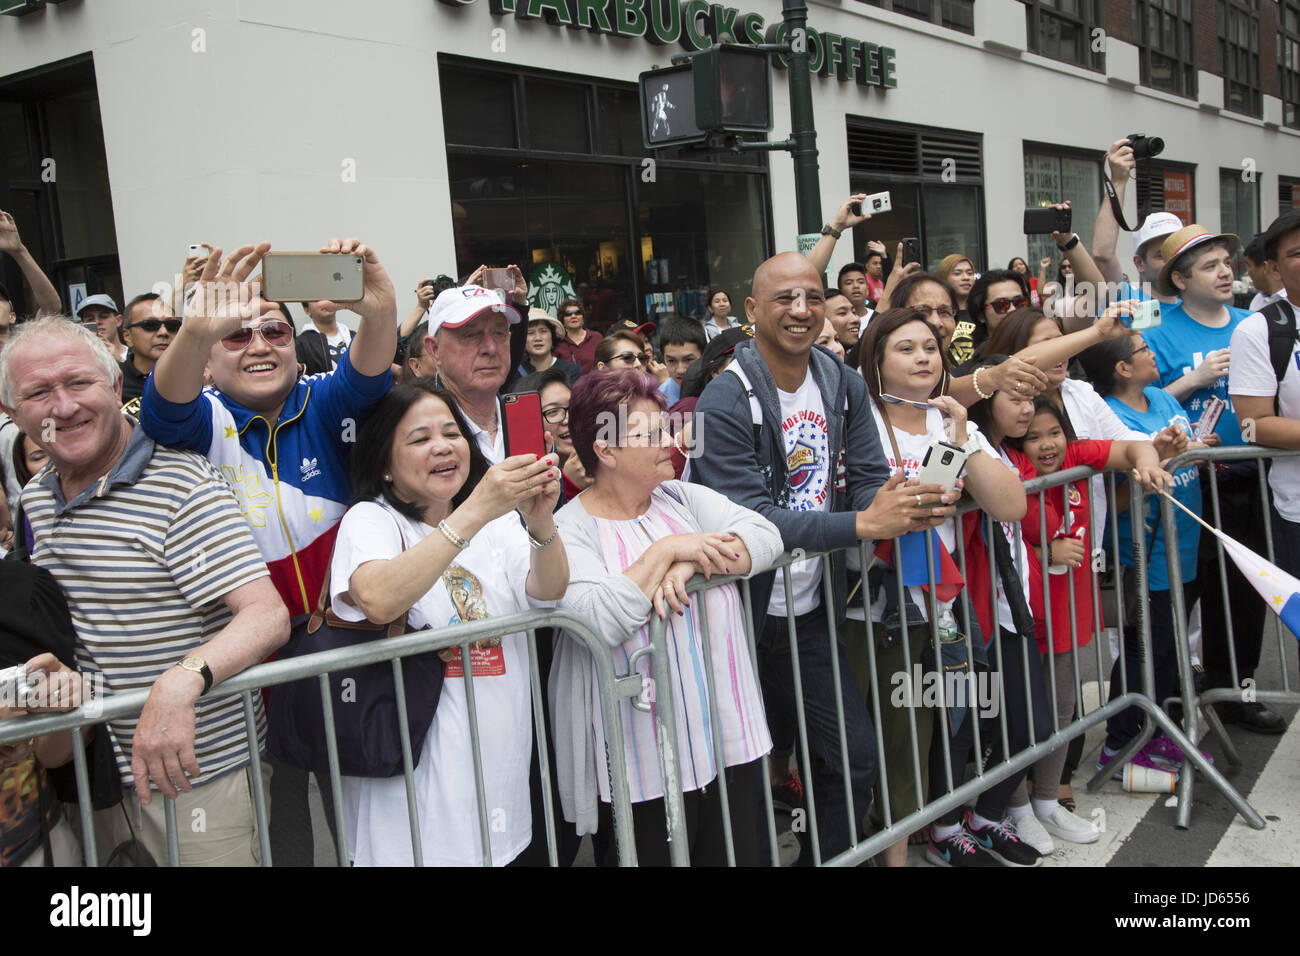 Philippine Independence Day Parade along Madison Avenue in New York City. Filipino American spectators at the parade. Stock Photo